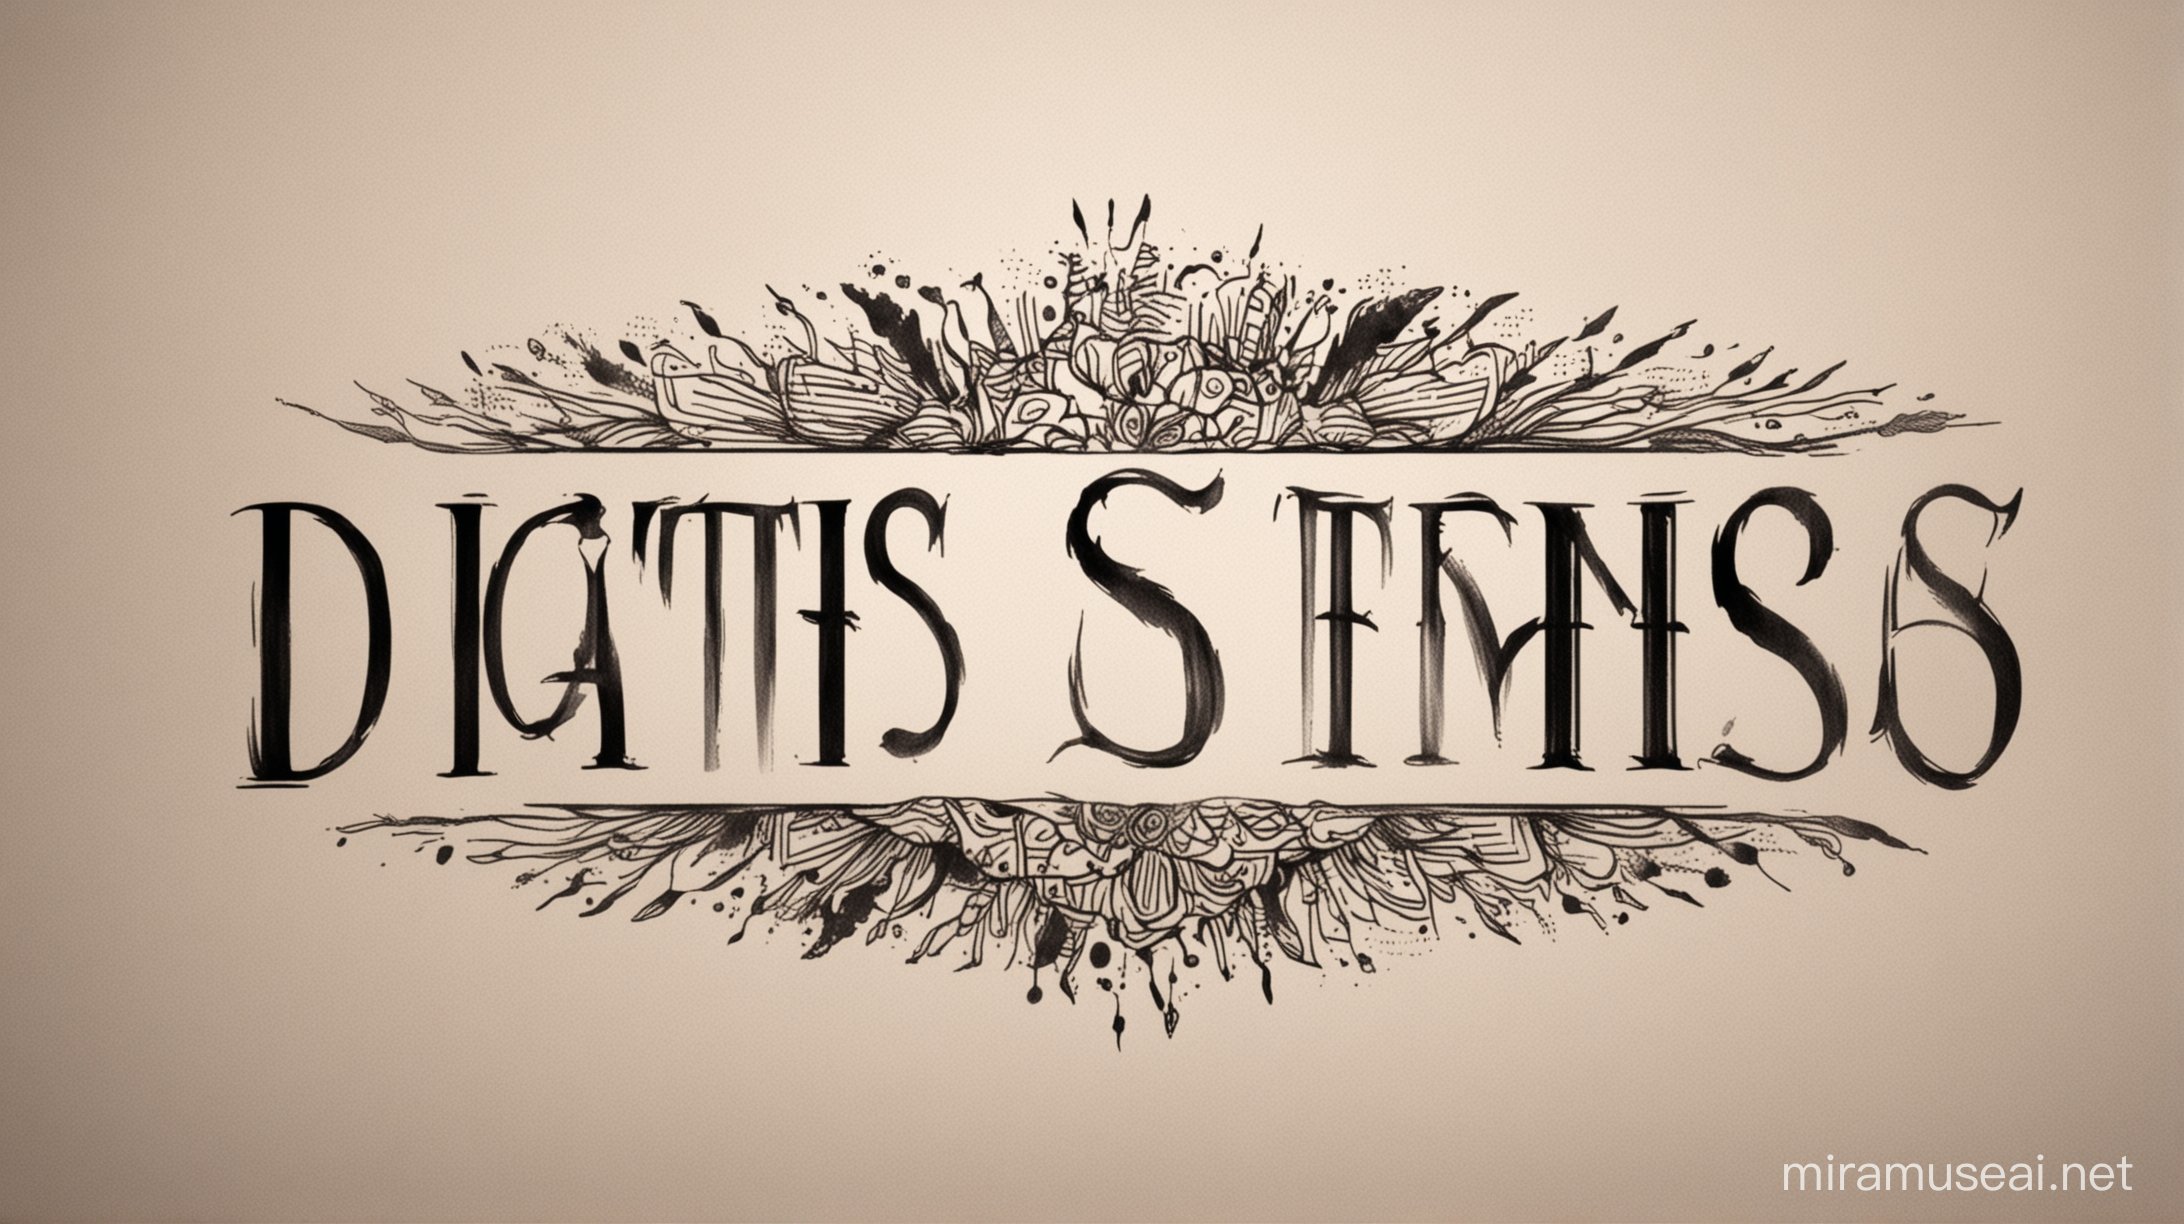 Title: "Digitis Tattoo Studio"

Banner Design:
[Image: A minimalist banner in 16:9 or 21:9 aspect ratio featuring the title "Digitis" in elegant typography, with sleek lines and subtle detailing to evoke the essence of tattoo artistry. The background is a muted palette, allowing the text to stand out prominently. Surrounding the title are abstract designs hinting at the diversity of tattoo styles offered at the studio, from intricate linework to geometric patterns. The overall aesthetic is modern and sophisticated, inviting viewers to embark on a journey of self-expression through ink.]






